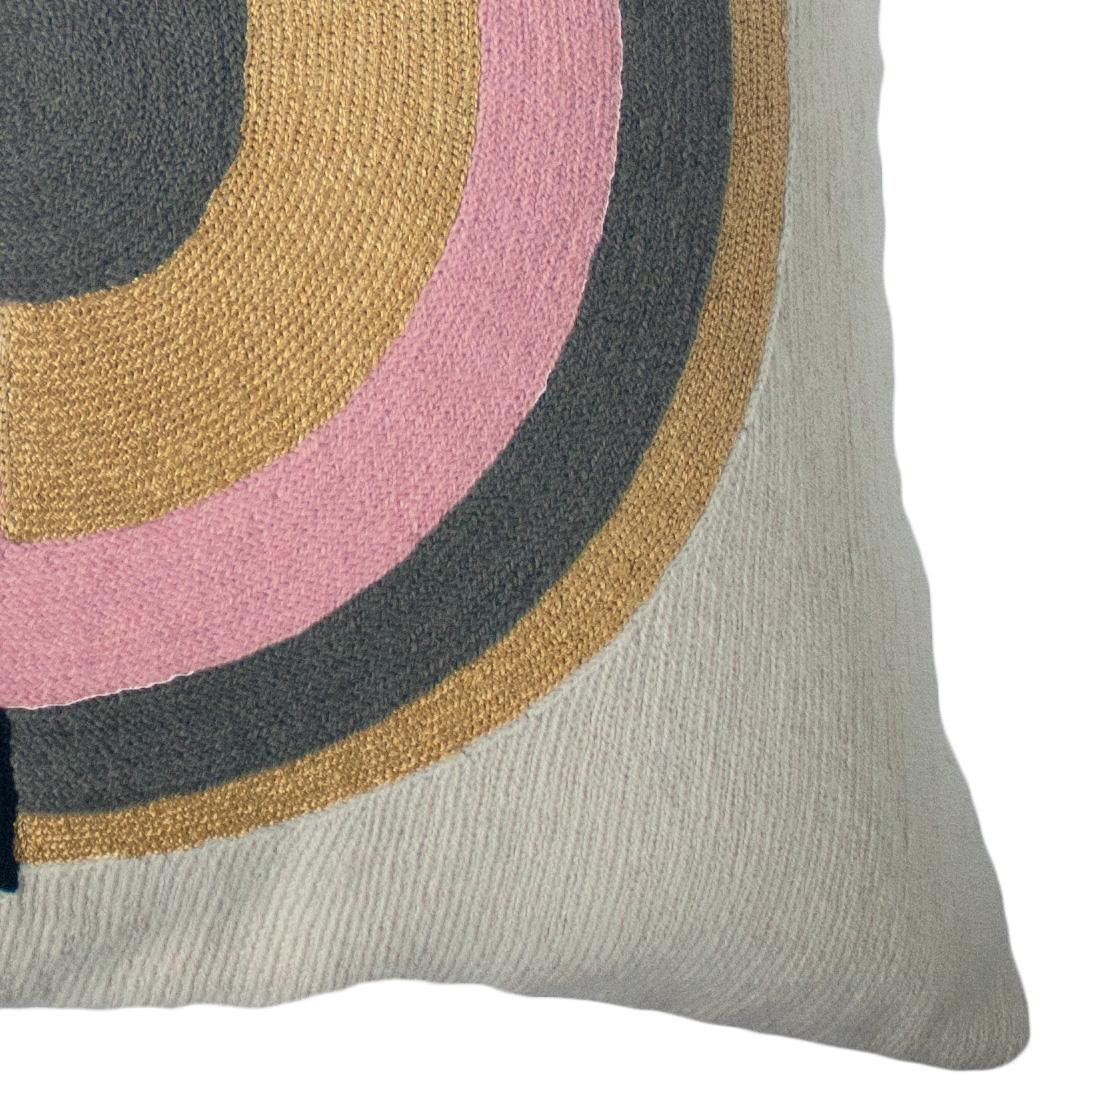 This geometric throw pillow has been ethically hand embroidered by artisans in Kashmir, India, using a traditional embroidery technique which is native to this region.

The purchase of this handcrafted pillow helps to support the artisans and